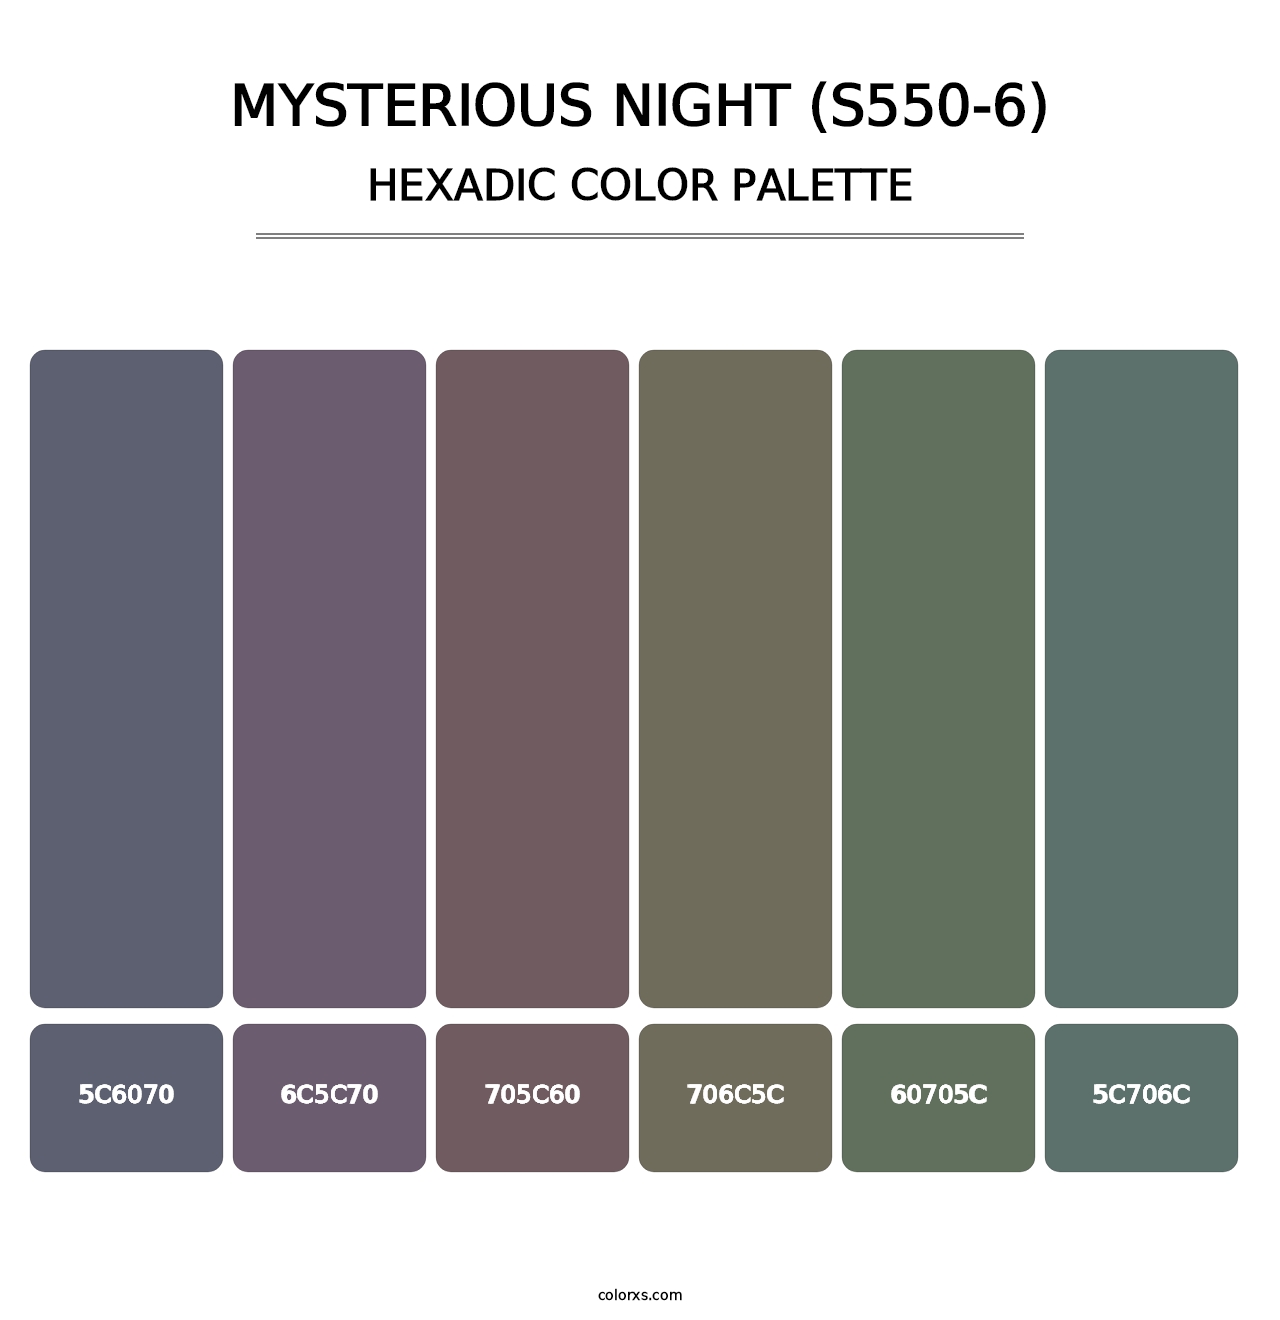 Mysterious Night (S550-6) - Hexadic Color Palette